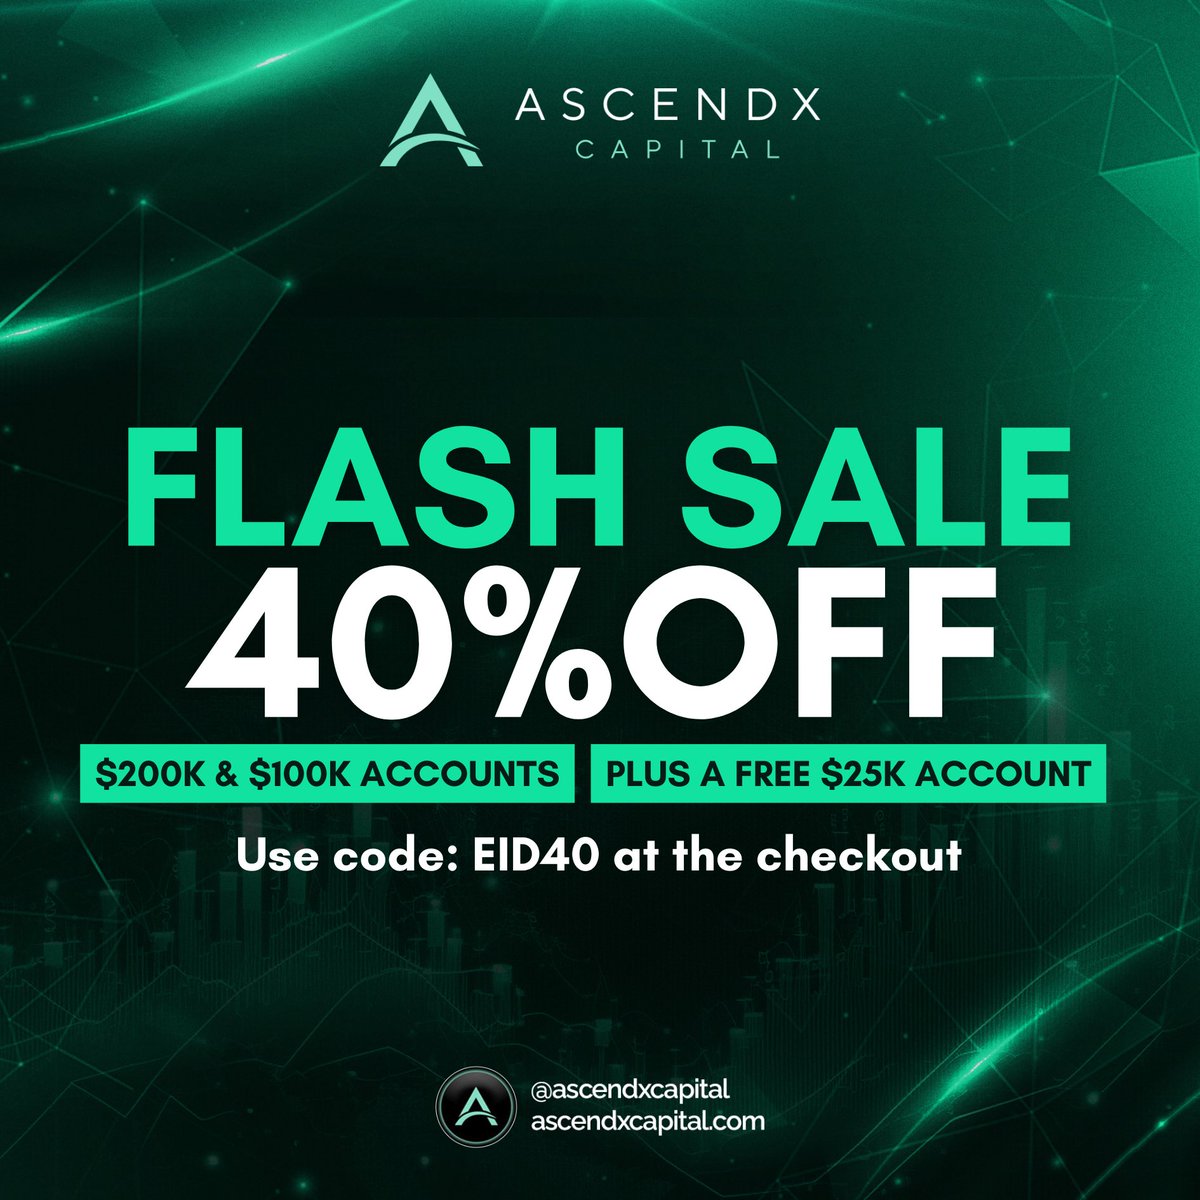 Unlock Your Trading Potential this Eid with our one day only flash sale! Enjoy 40% off $200k & $100k funded accounts and also receive a FREE $25k account when purchasing. Use code: EID40 at the checkout on ascendxcapital.com